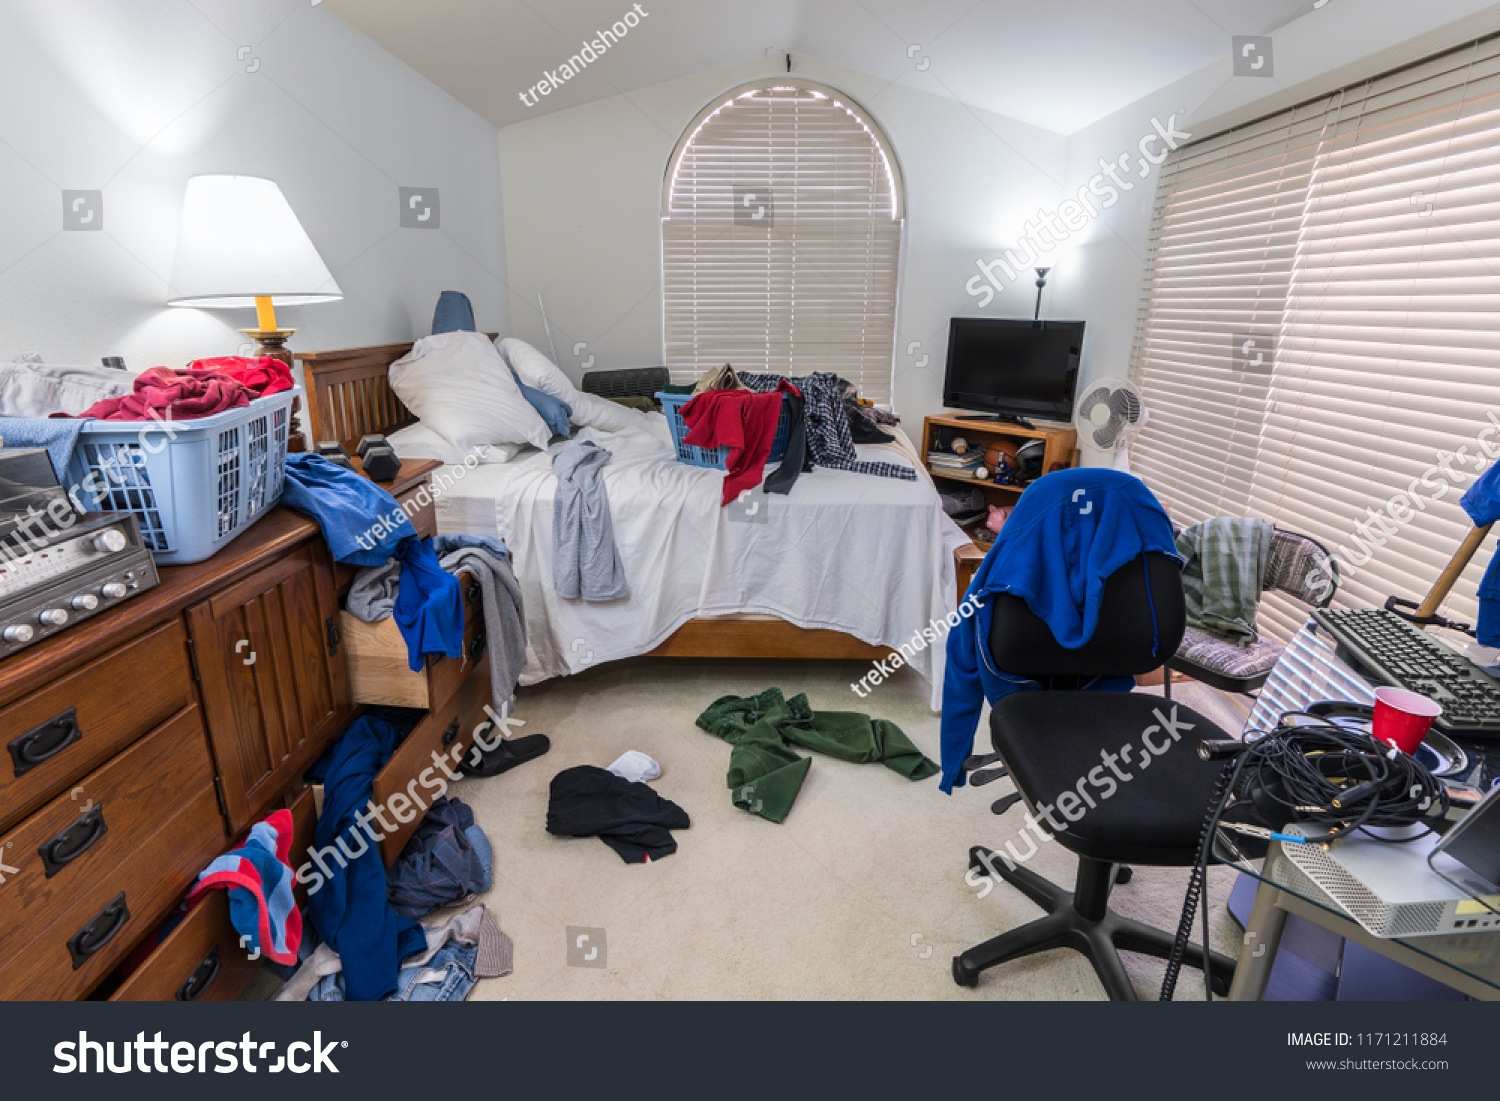 Messy, cluttered teenage boy's bedroom with piles of clothes, music and sports equipment.   #1171211884